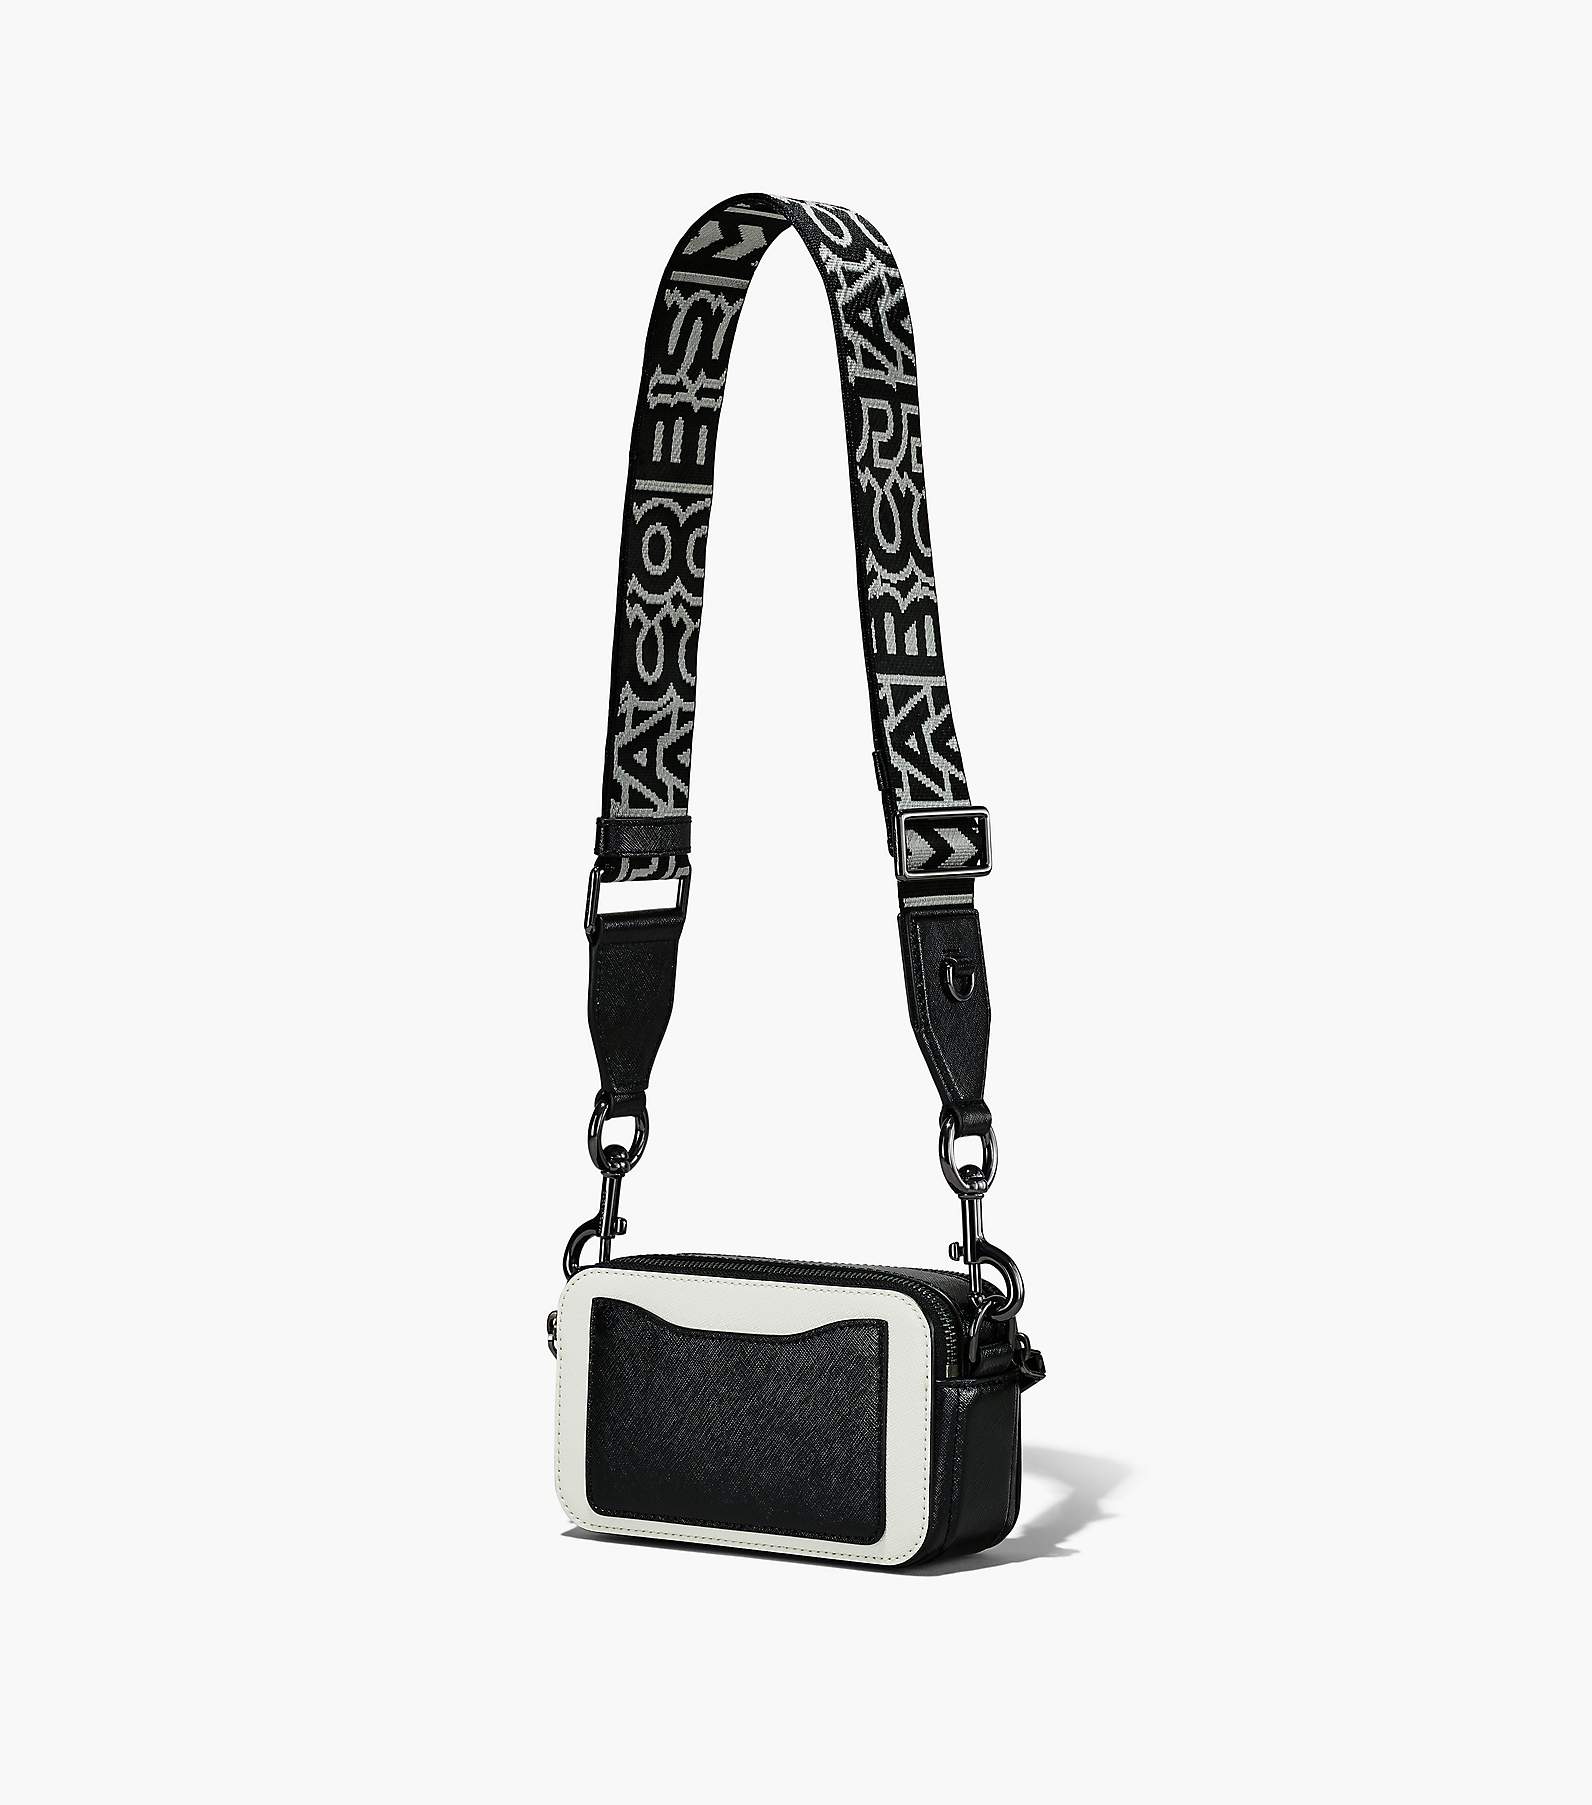 The Snapshot Crossbody - Marc Jacobs - Black/Red - Leather